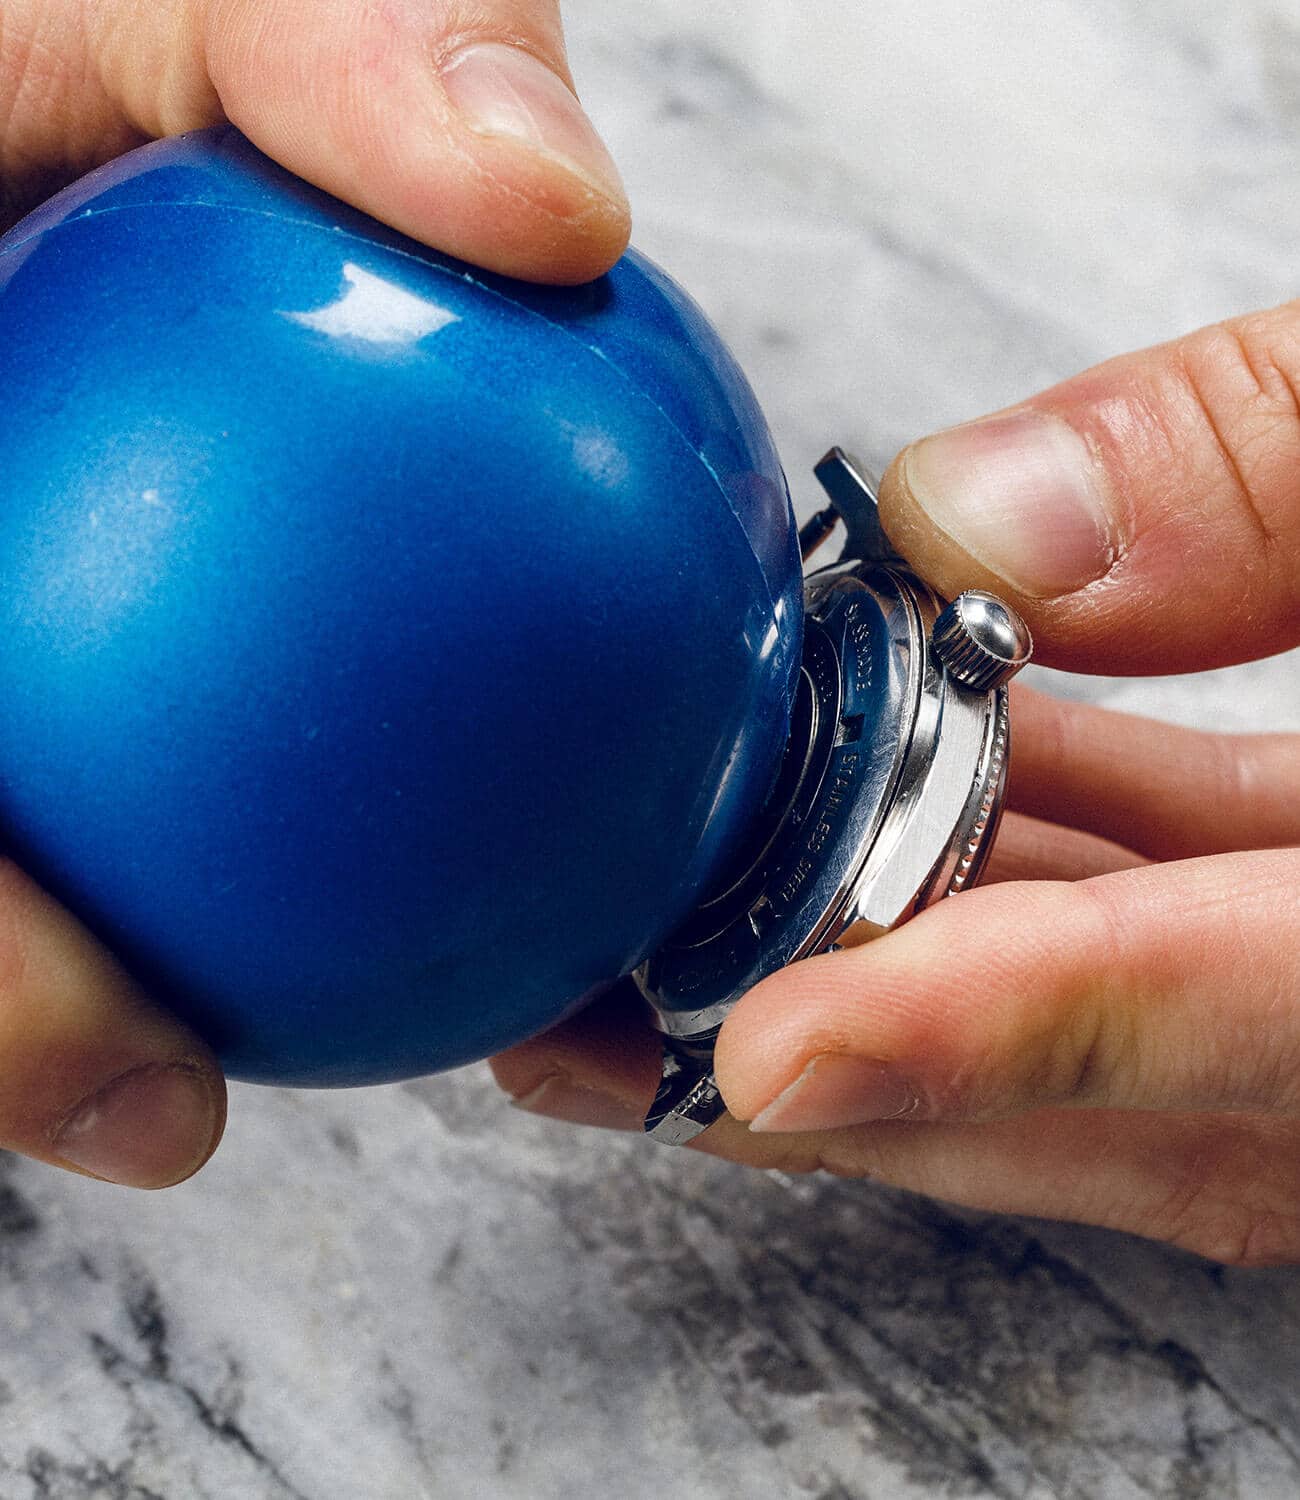 Using a rubber ball on a screw-down watch